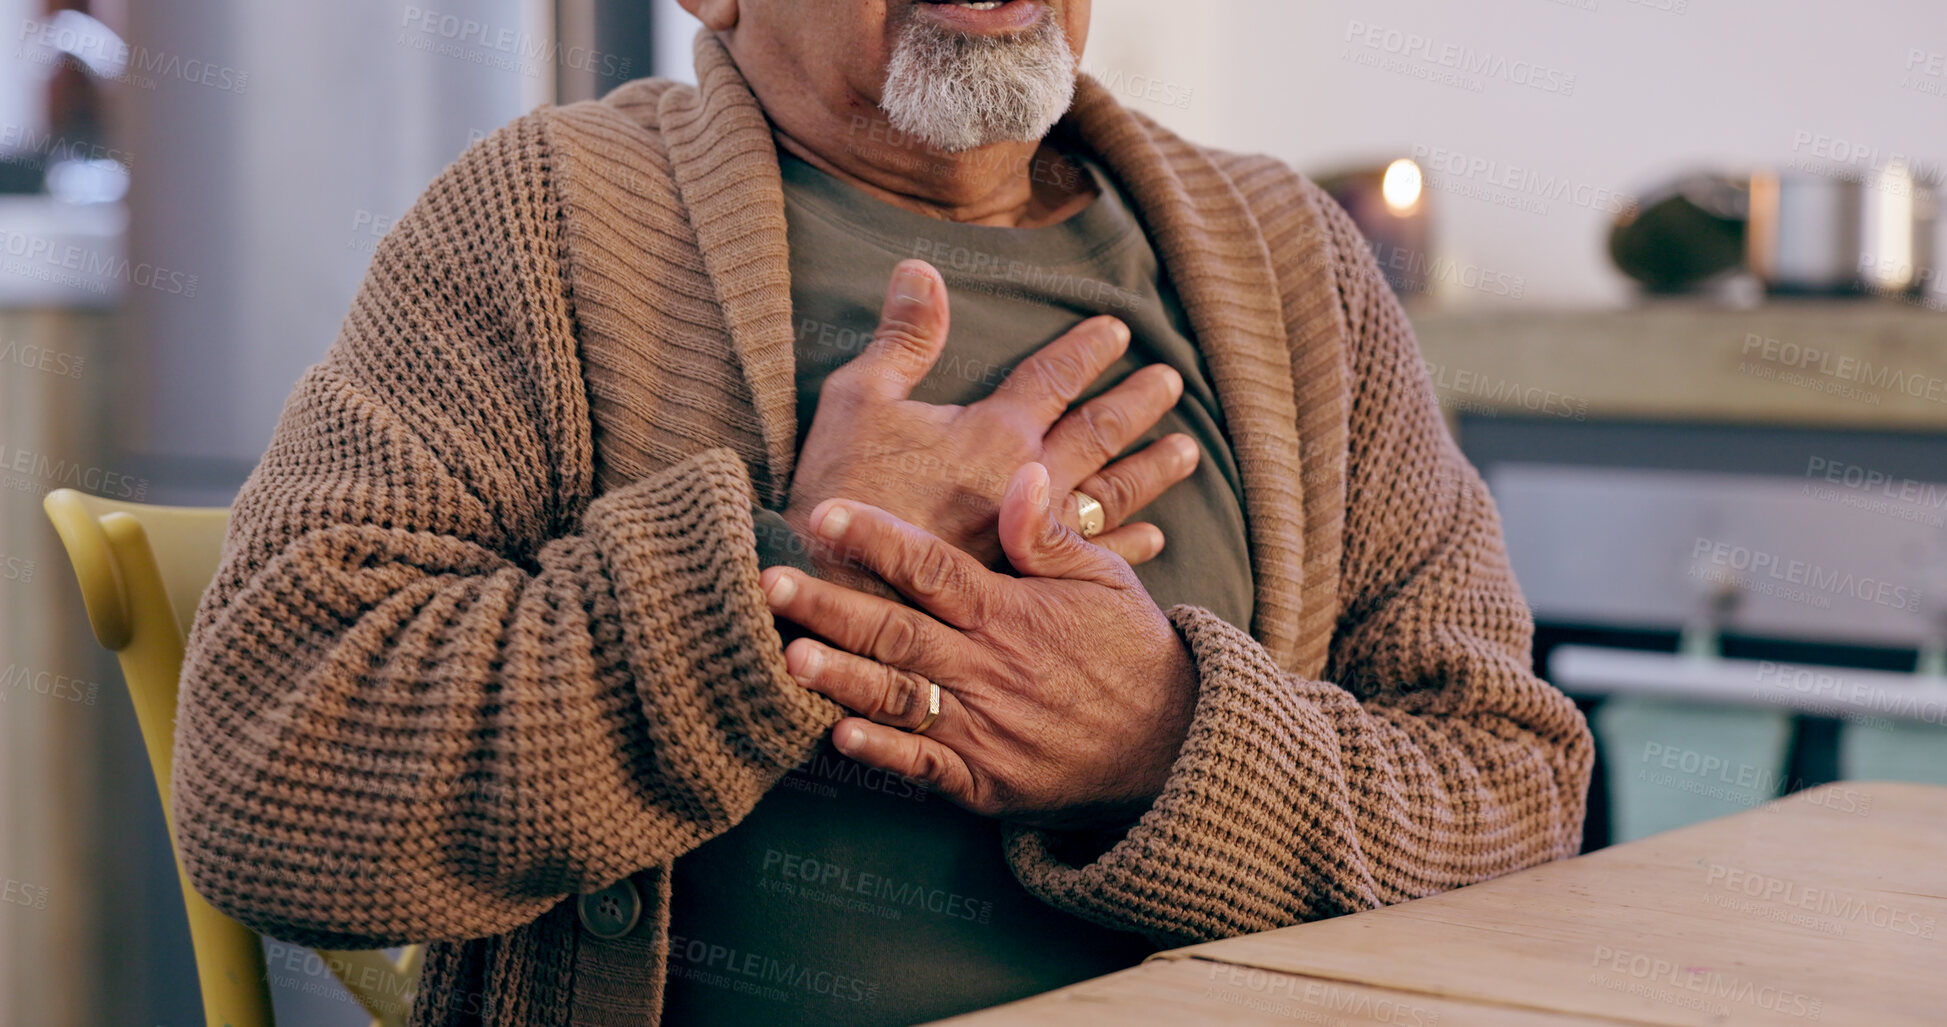 Buy stock photo Hands, breathing and heart attack with a senior person in the dining room of a retirement home closeup. Healthcare, medical or emergency and an elderly adult with chest pain for cardiac arrest